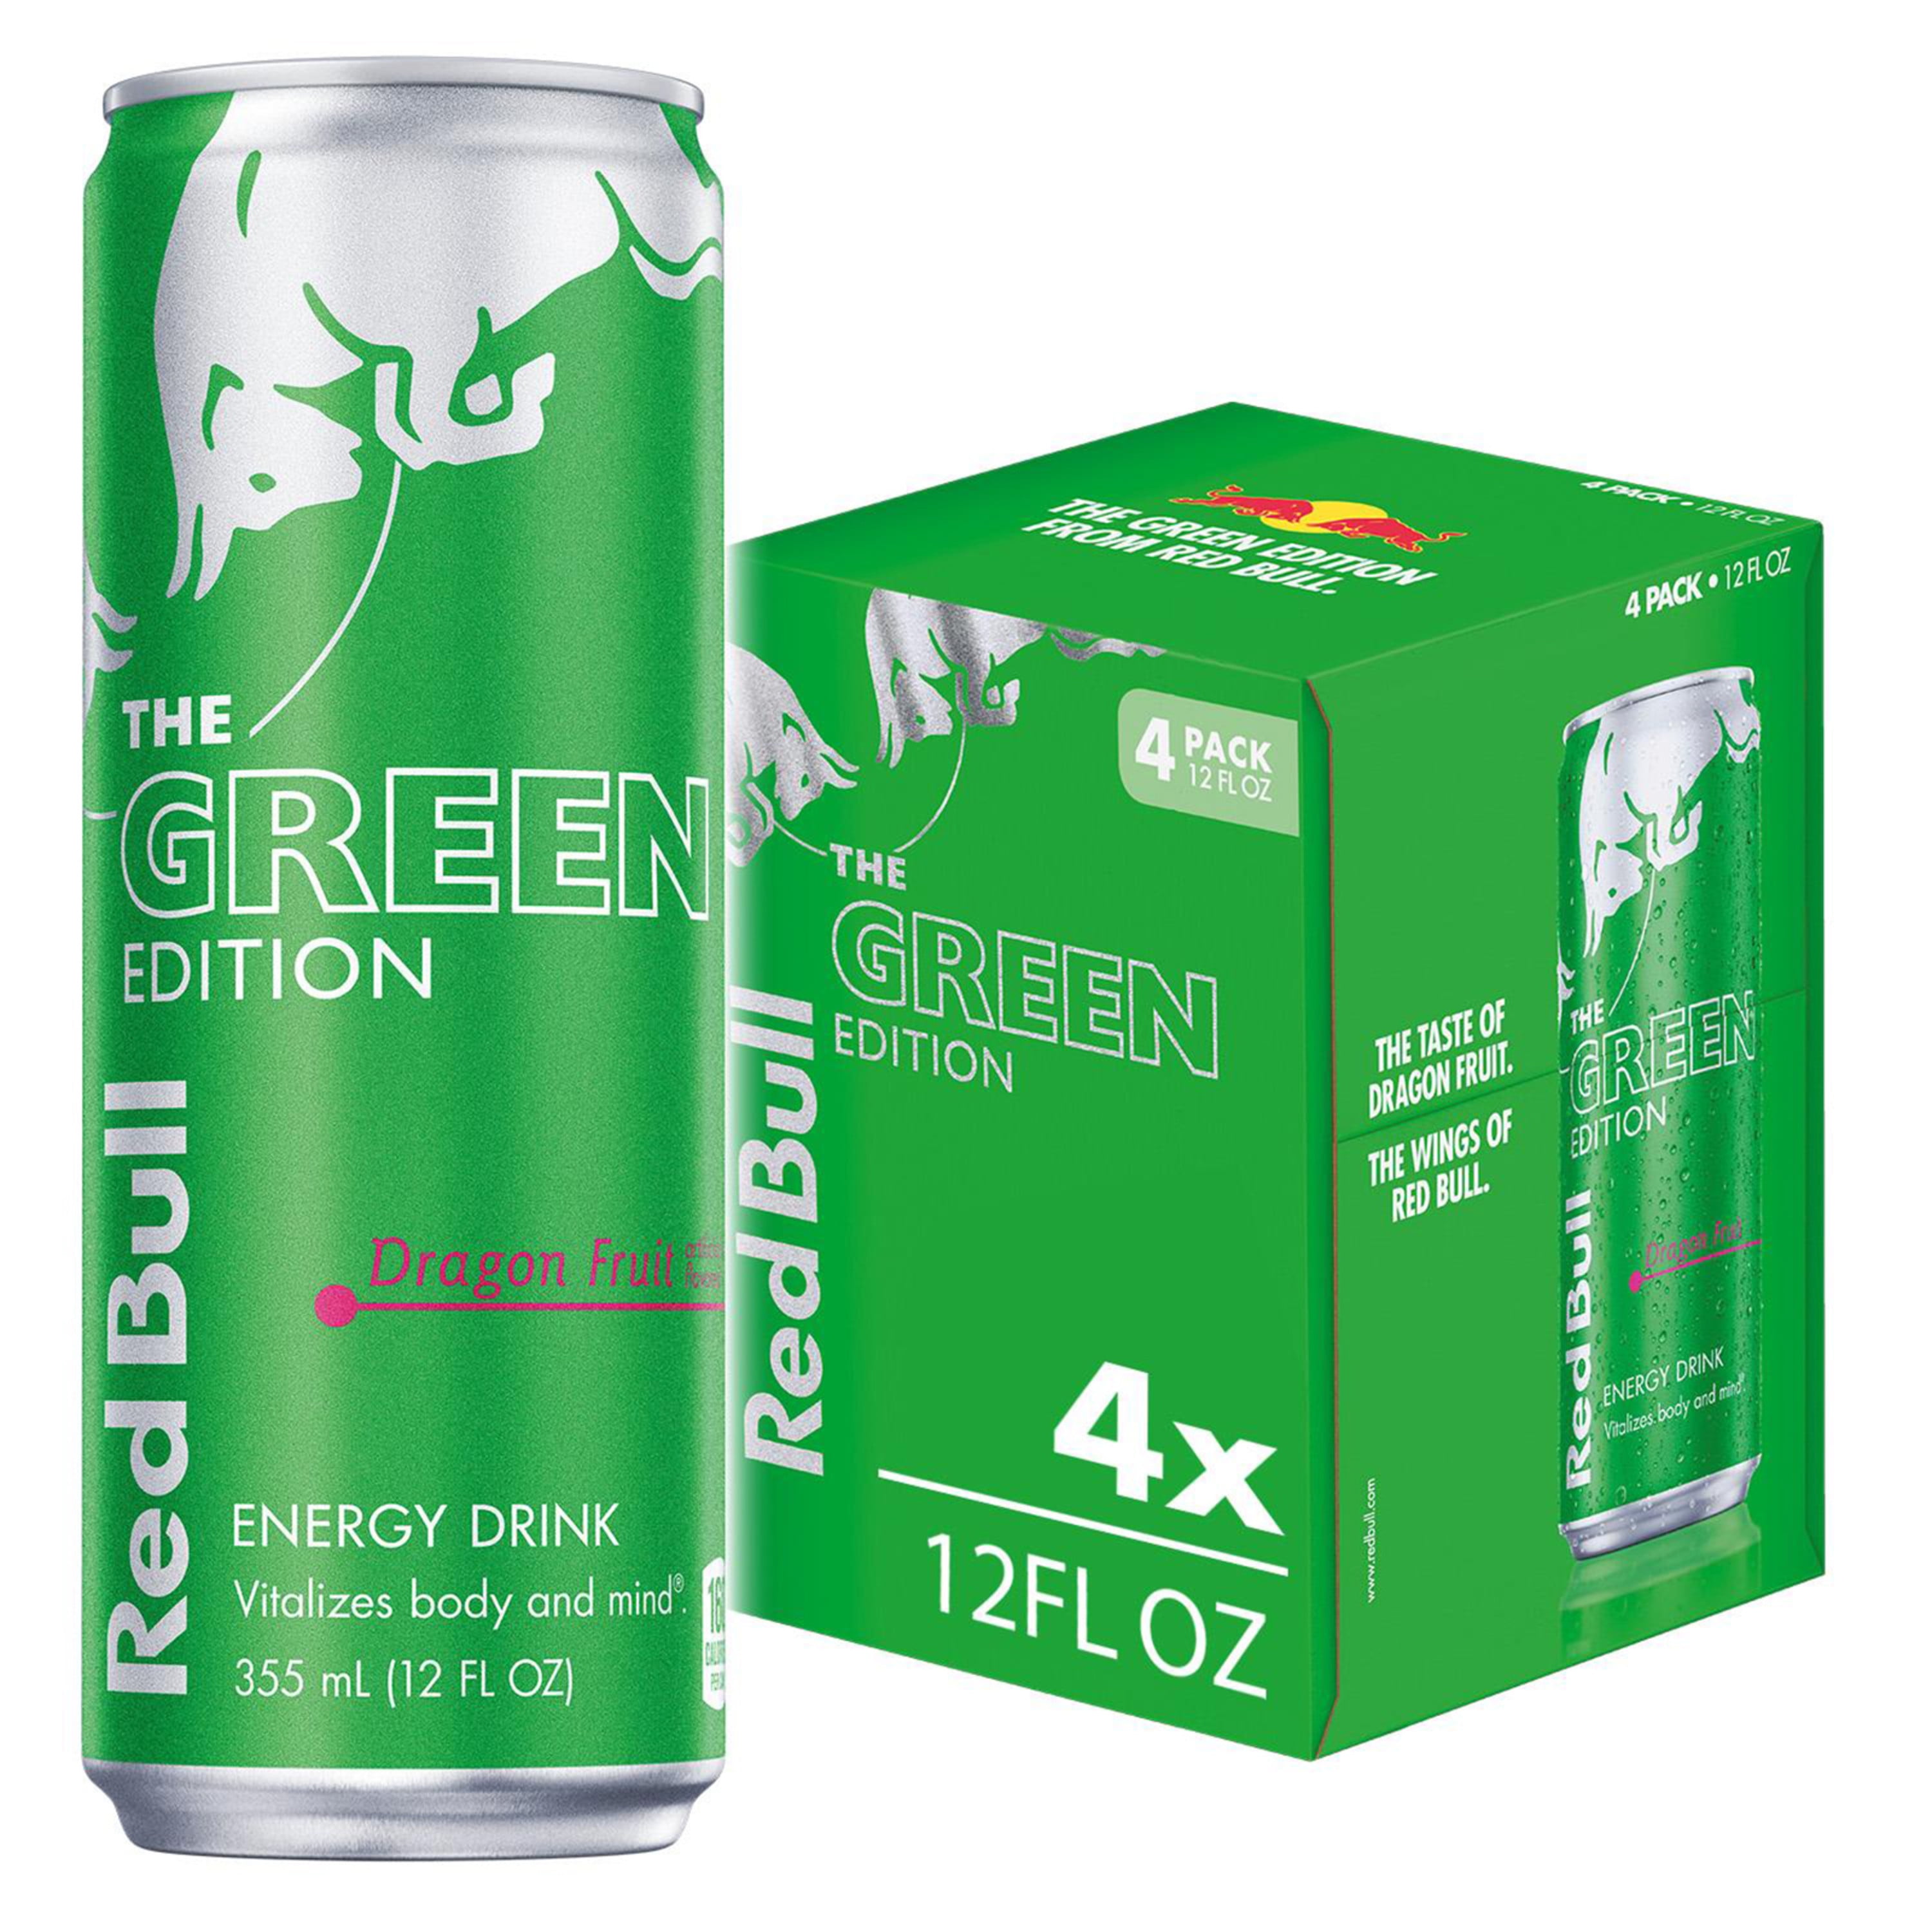 Red Bull Energy Drink, The Green Edition, Dragon Fruit, 12 Fl Oz (4 pack)